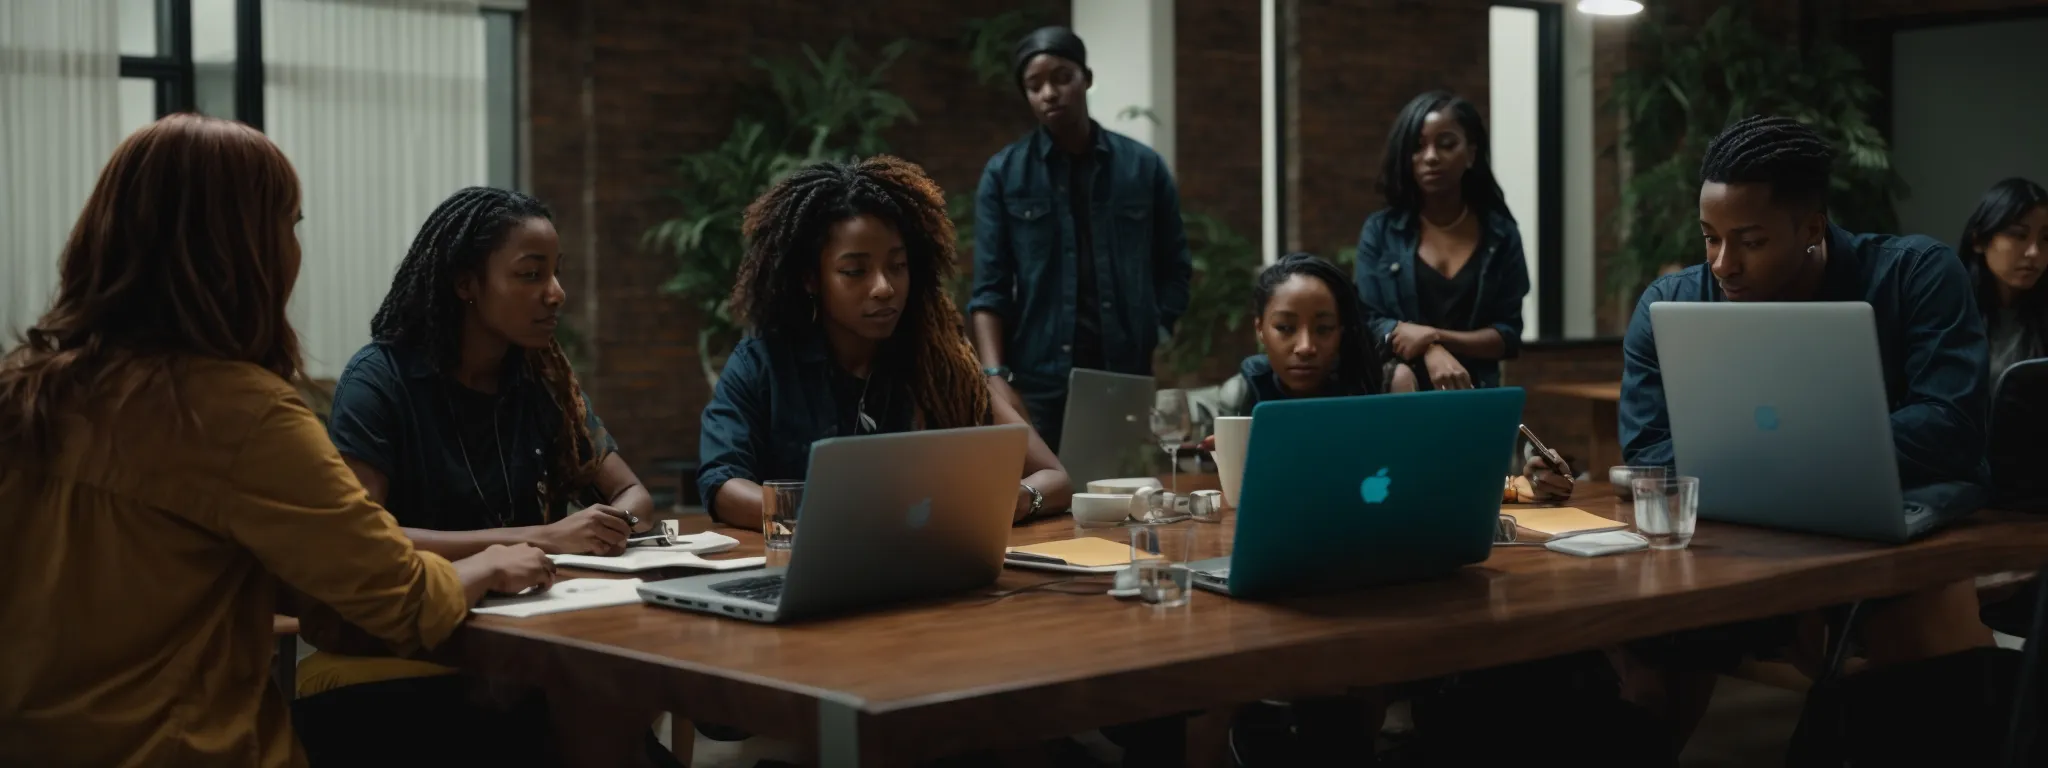 a diverse group of people sits around a large, modern table, intently focused on a laptop displaying a colorful interface while discussing strategies.